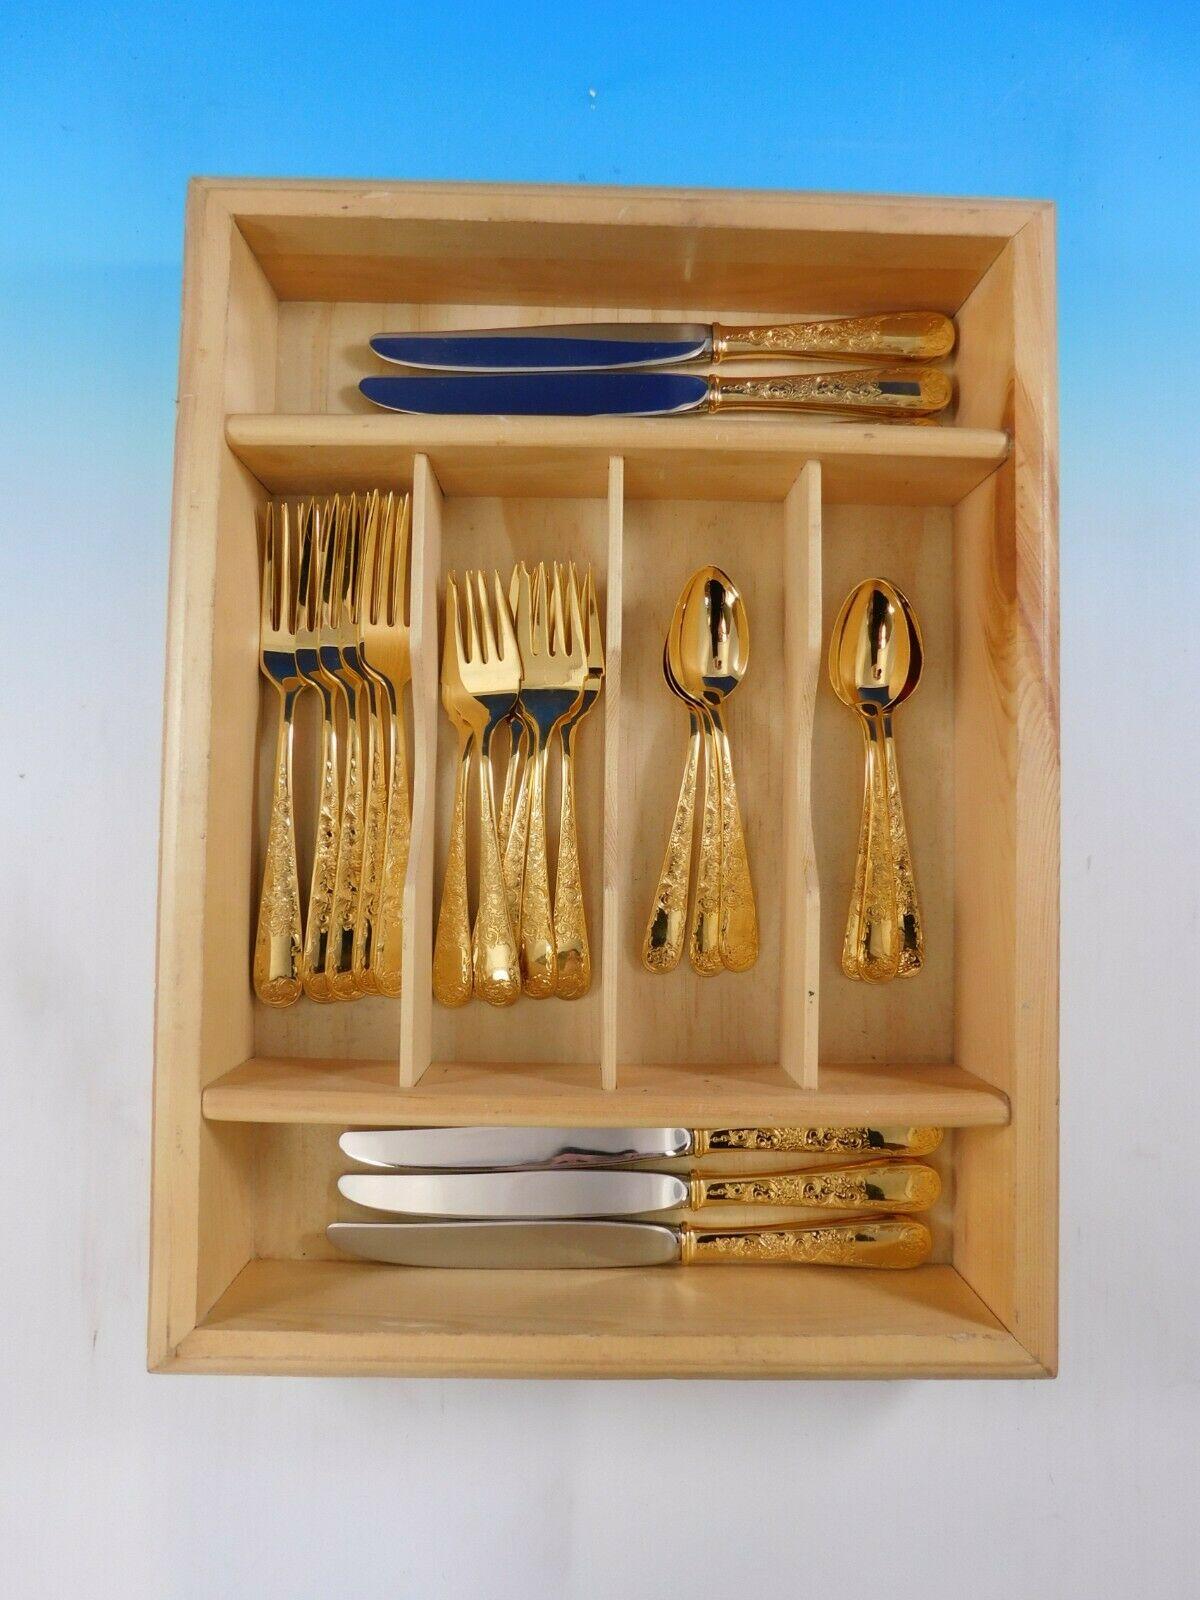 Fabulous Old Maryland engraved gold by Kirk sterling silver flatware set - 32 pieces. Gold flatware is on trend and makes a bold statement on your table. This set is vermeil (completely gold-washed) and includes:

6 knives, 8 7/8